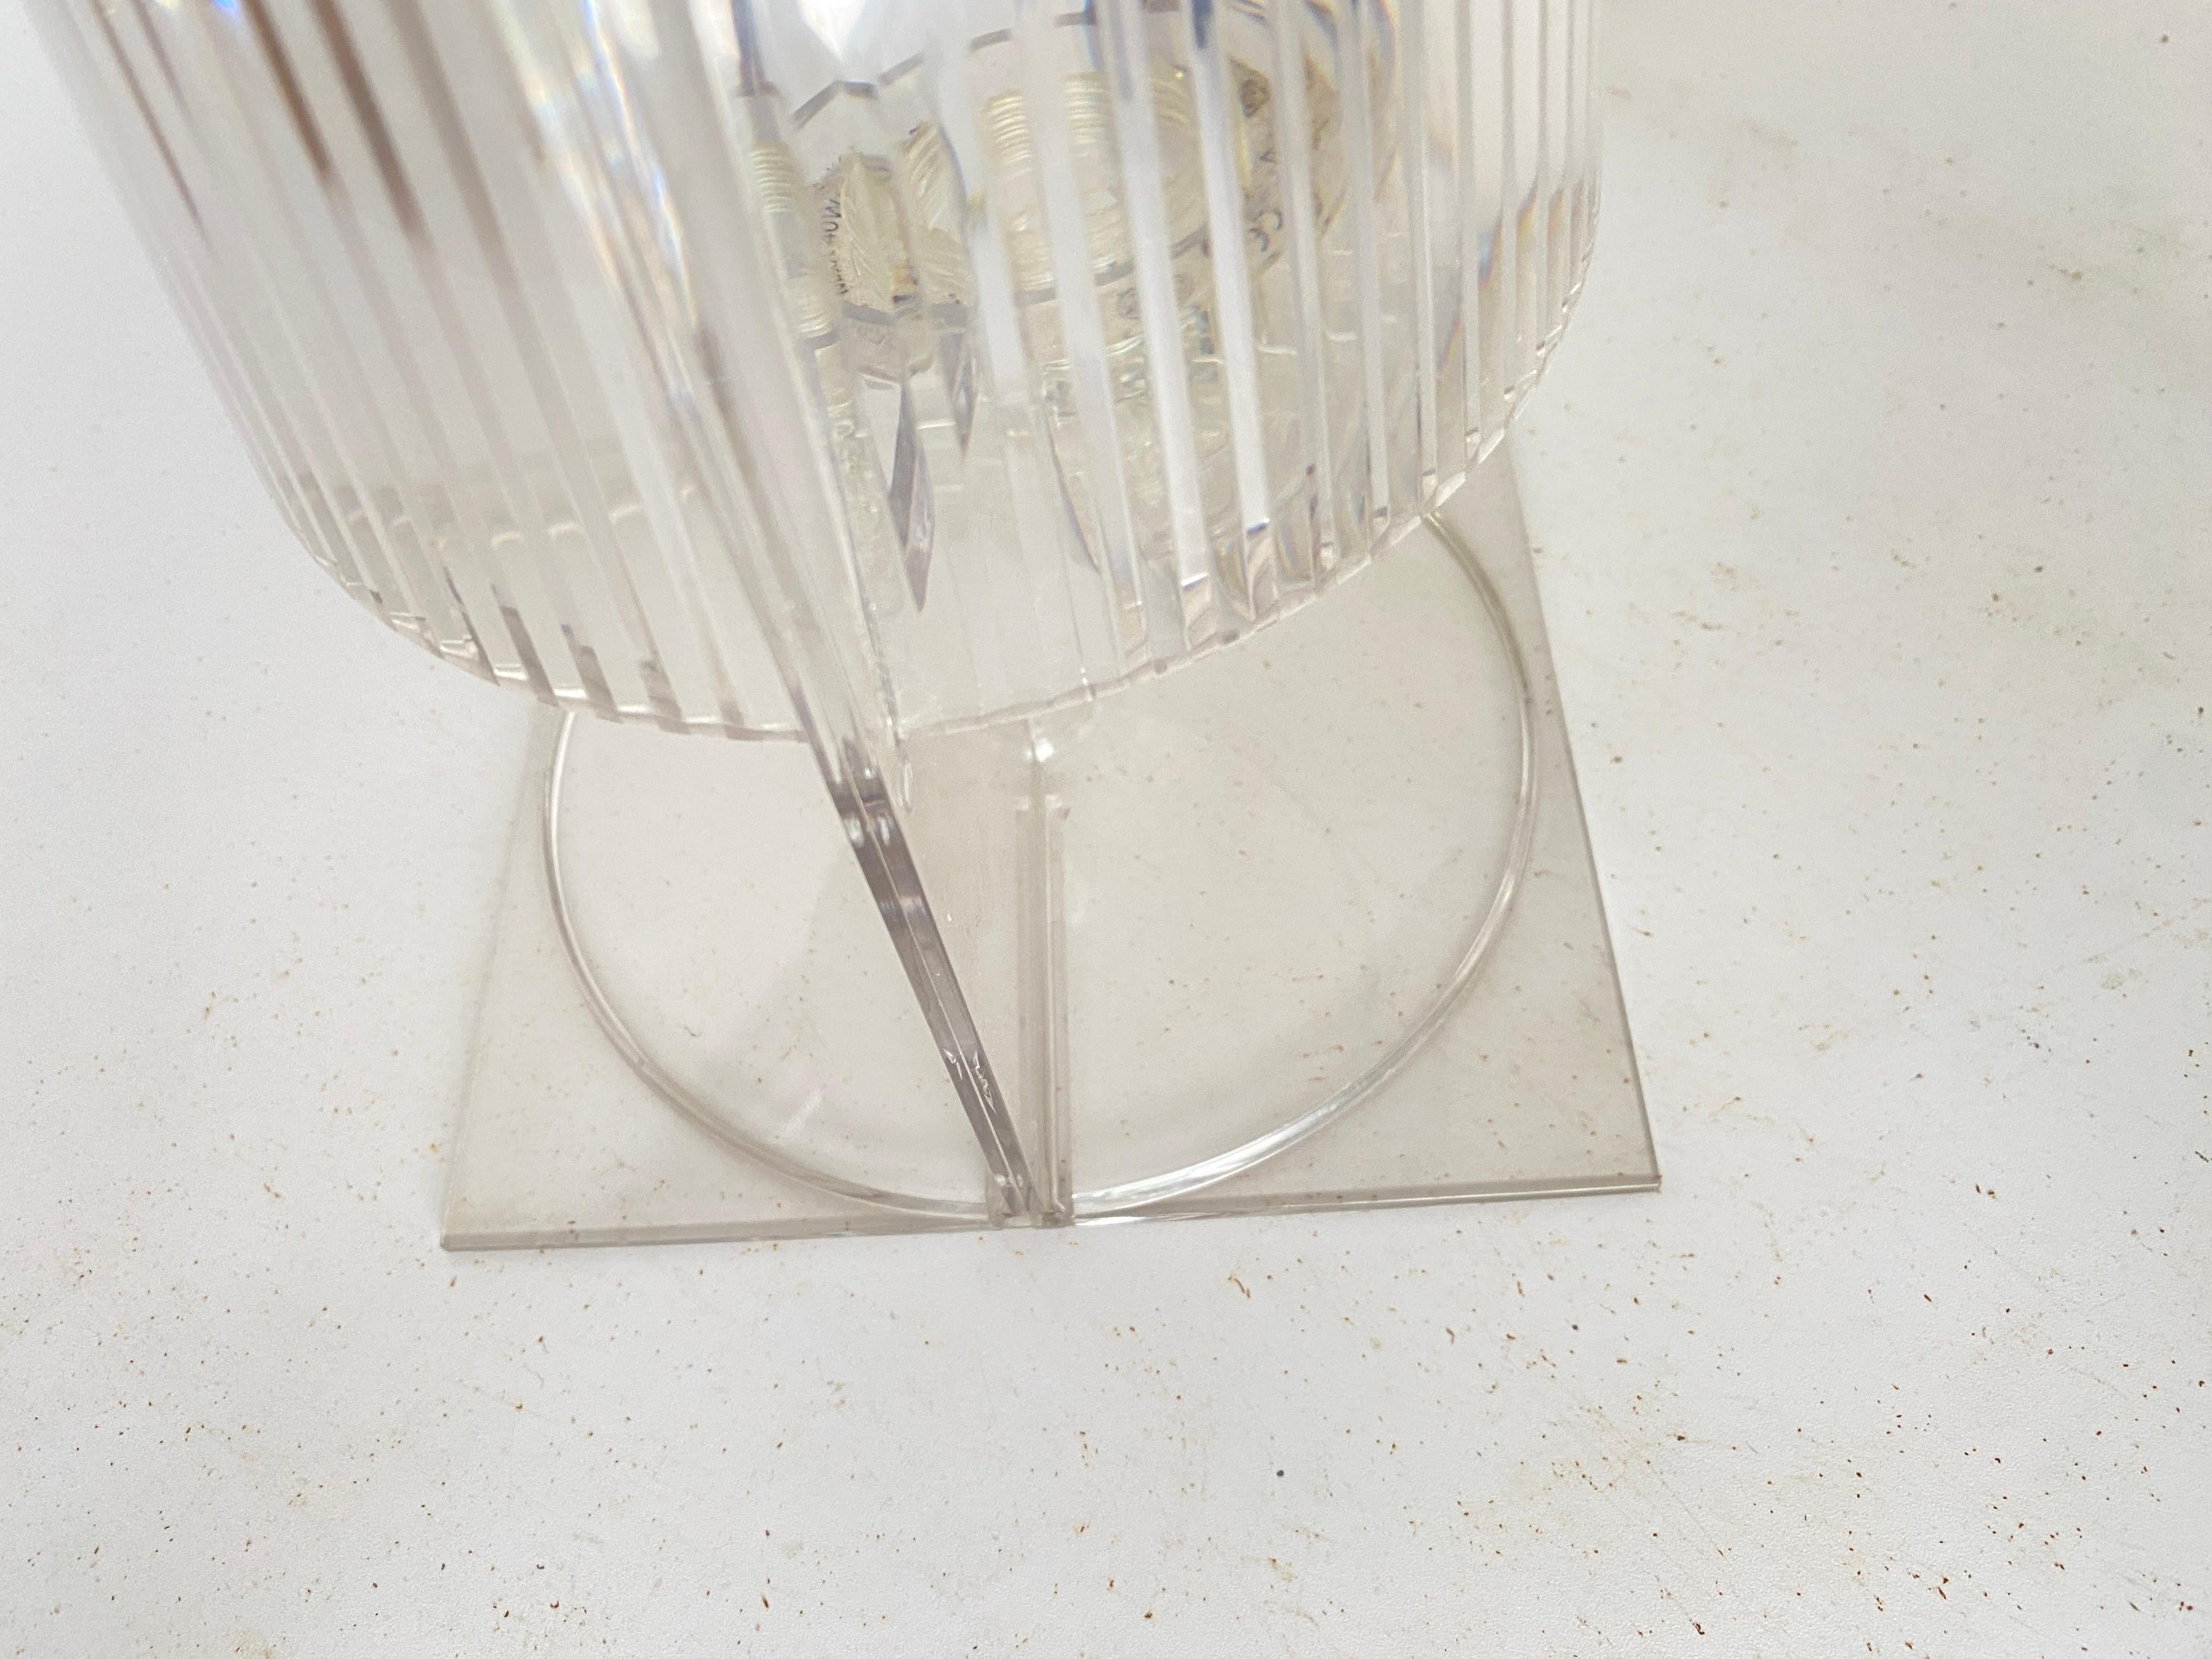  Kartell Take Lamp in Crystal by Ferruccio Laviani, Italian 21 Century In Good Condition For Sale In Auribeau sur Siagne, FR